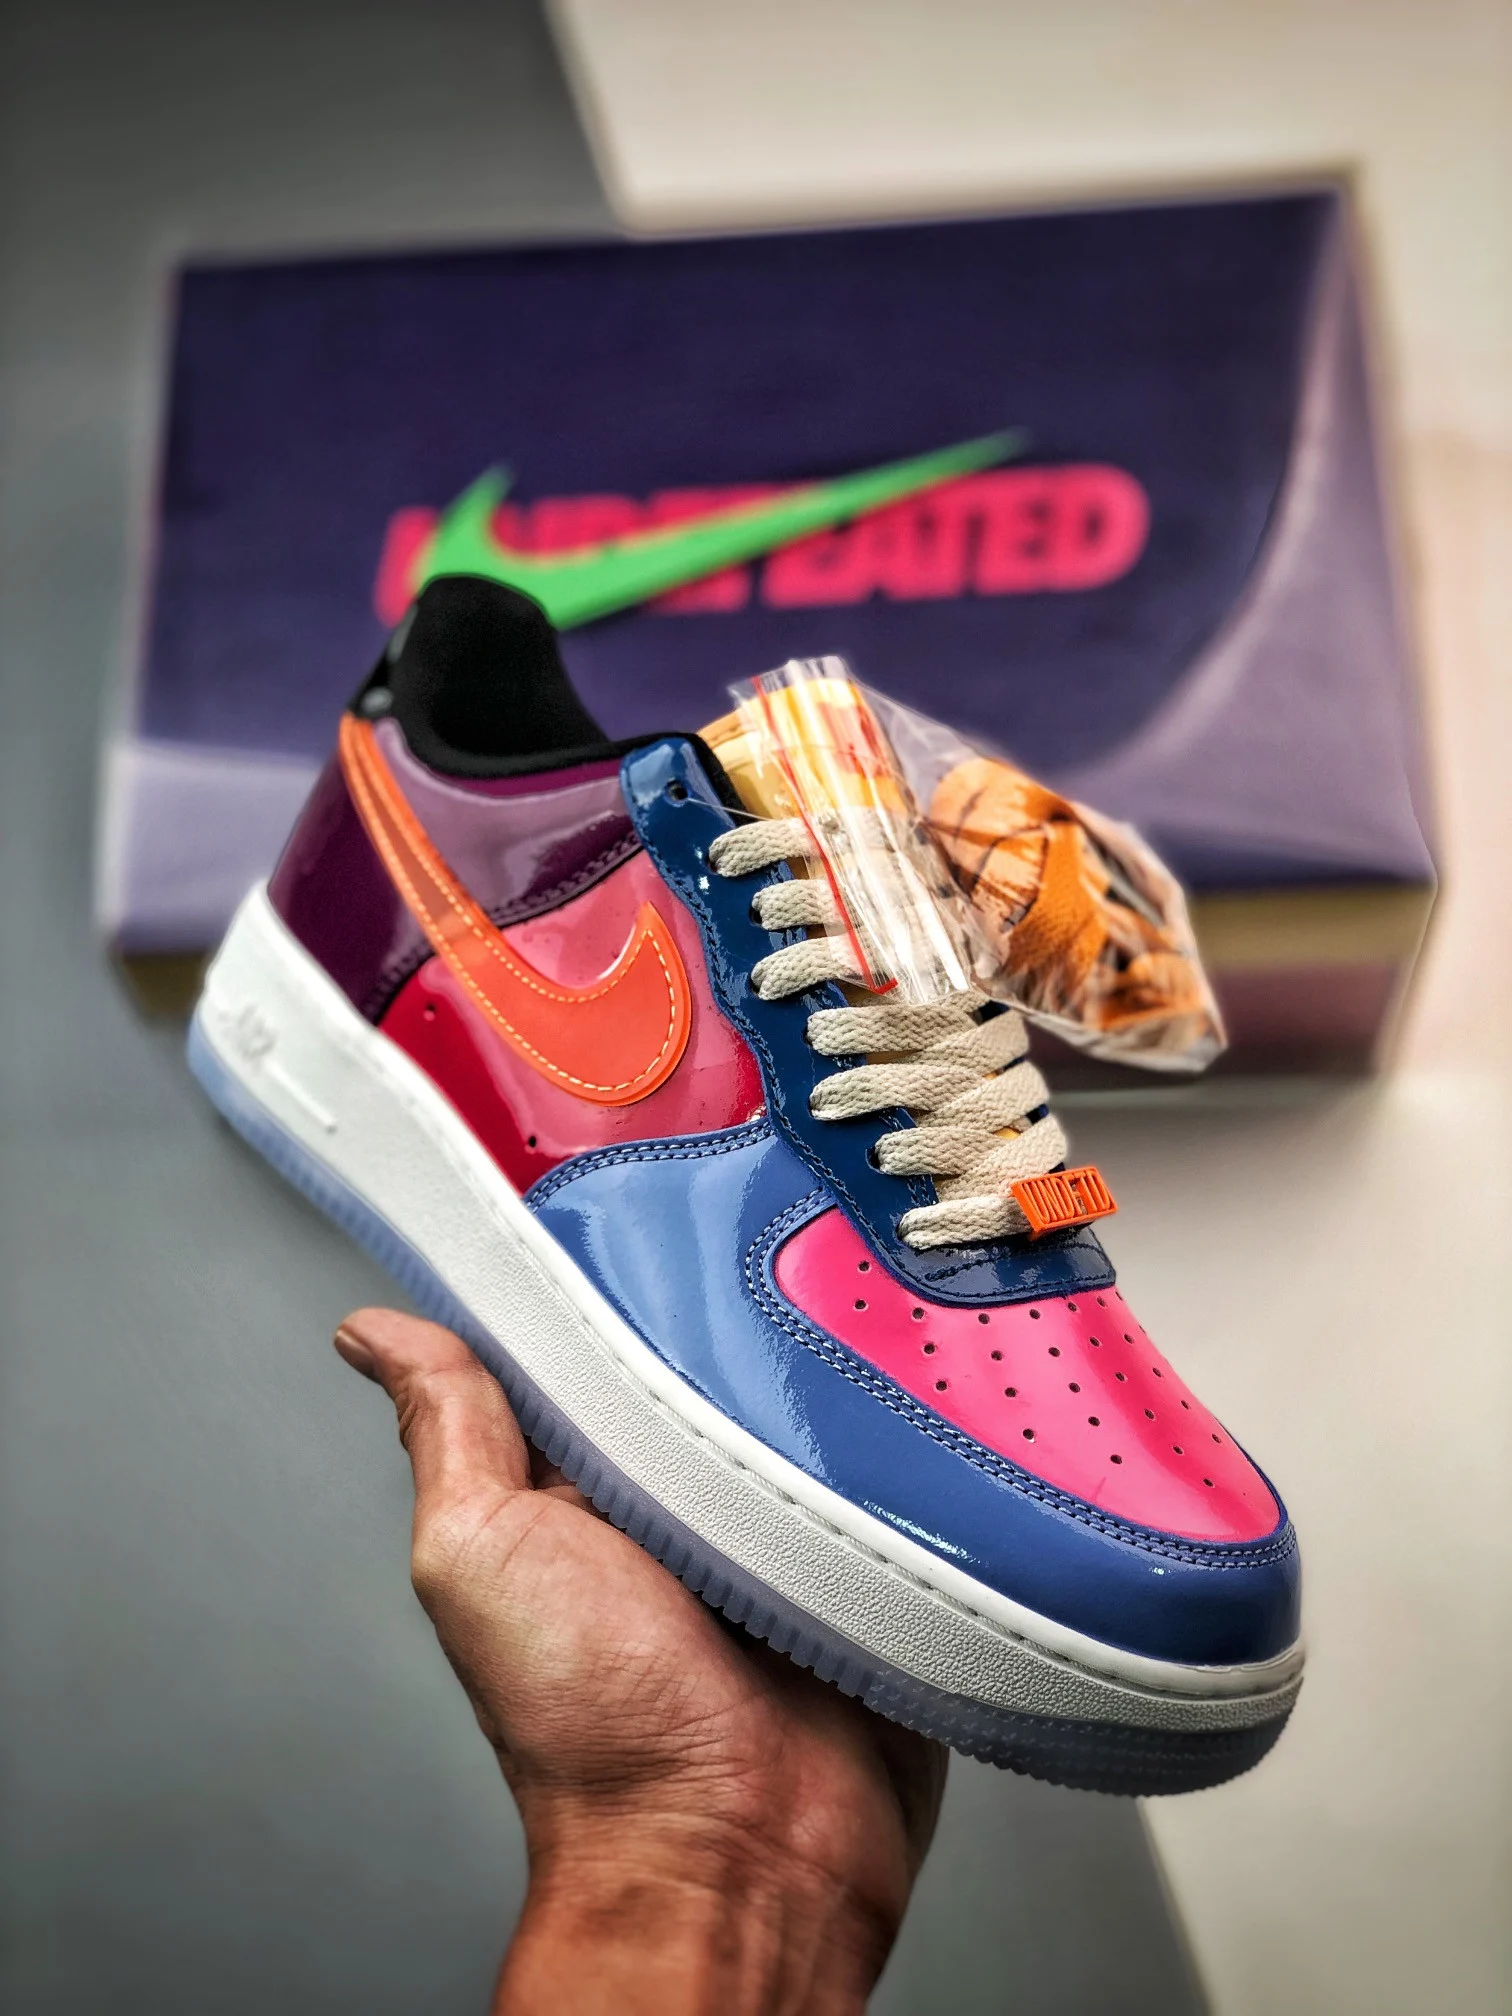 Undefeated X Nike Air Force 1 Low Polar Total Orange-Multi-Color For Sale